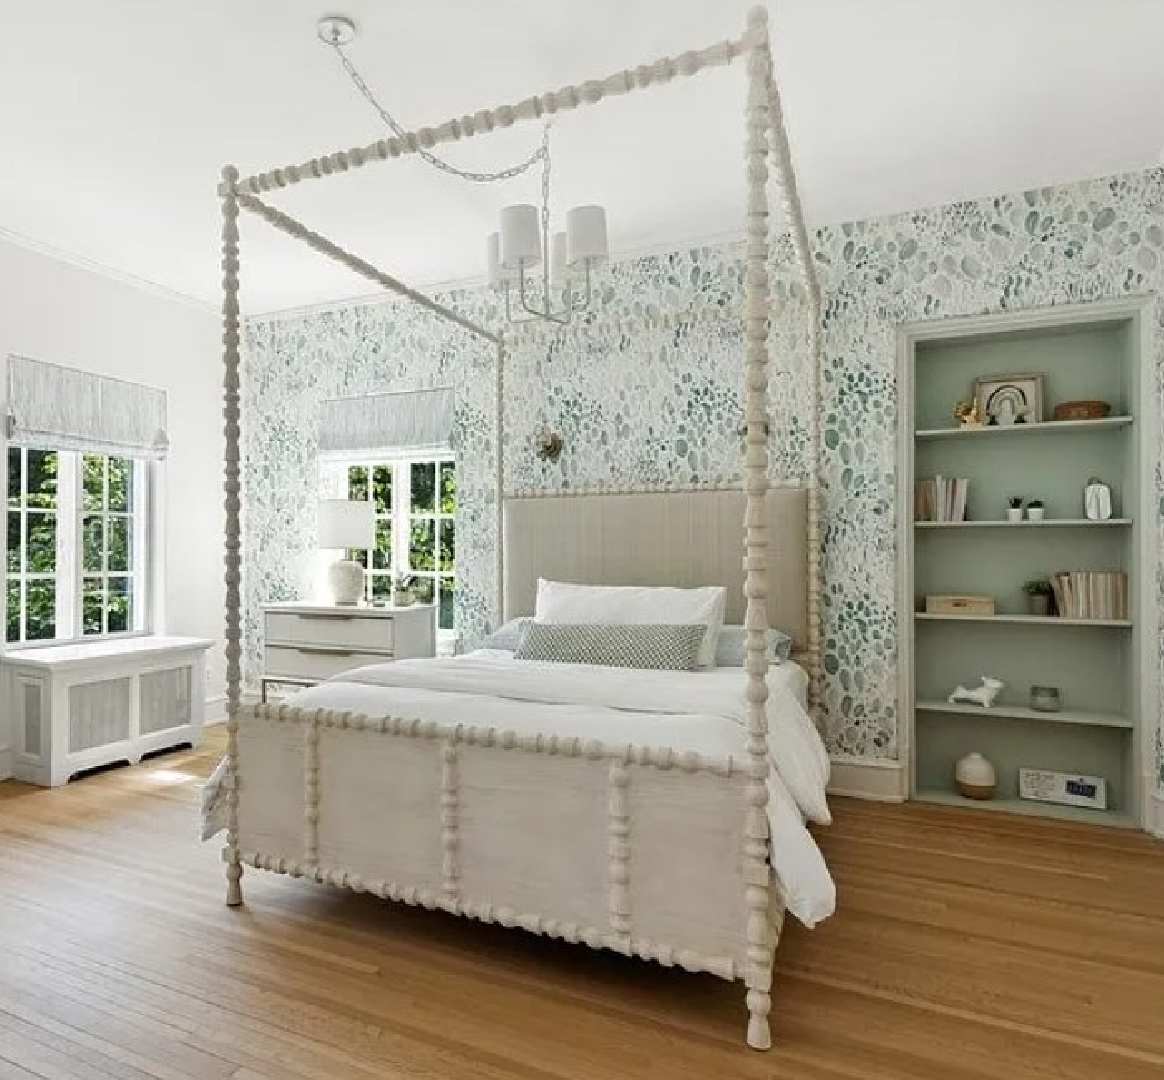 Green wallpapered bedroom in Kate Marker's 1920 white stucco Barrington Hills Home (160 N. Buckley Rd) with modern, serene, unfussy, timeless interiors. #katemarkerinteriors @thedawnmckennagroup #katemarkerhome